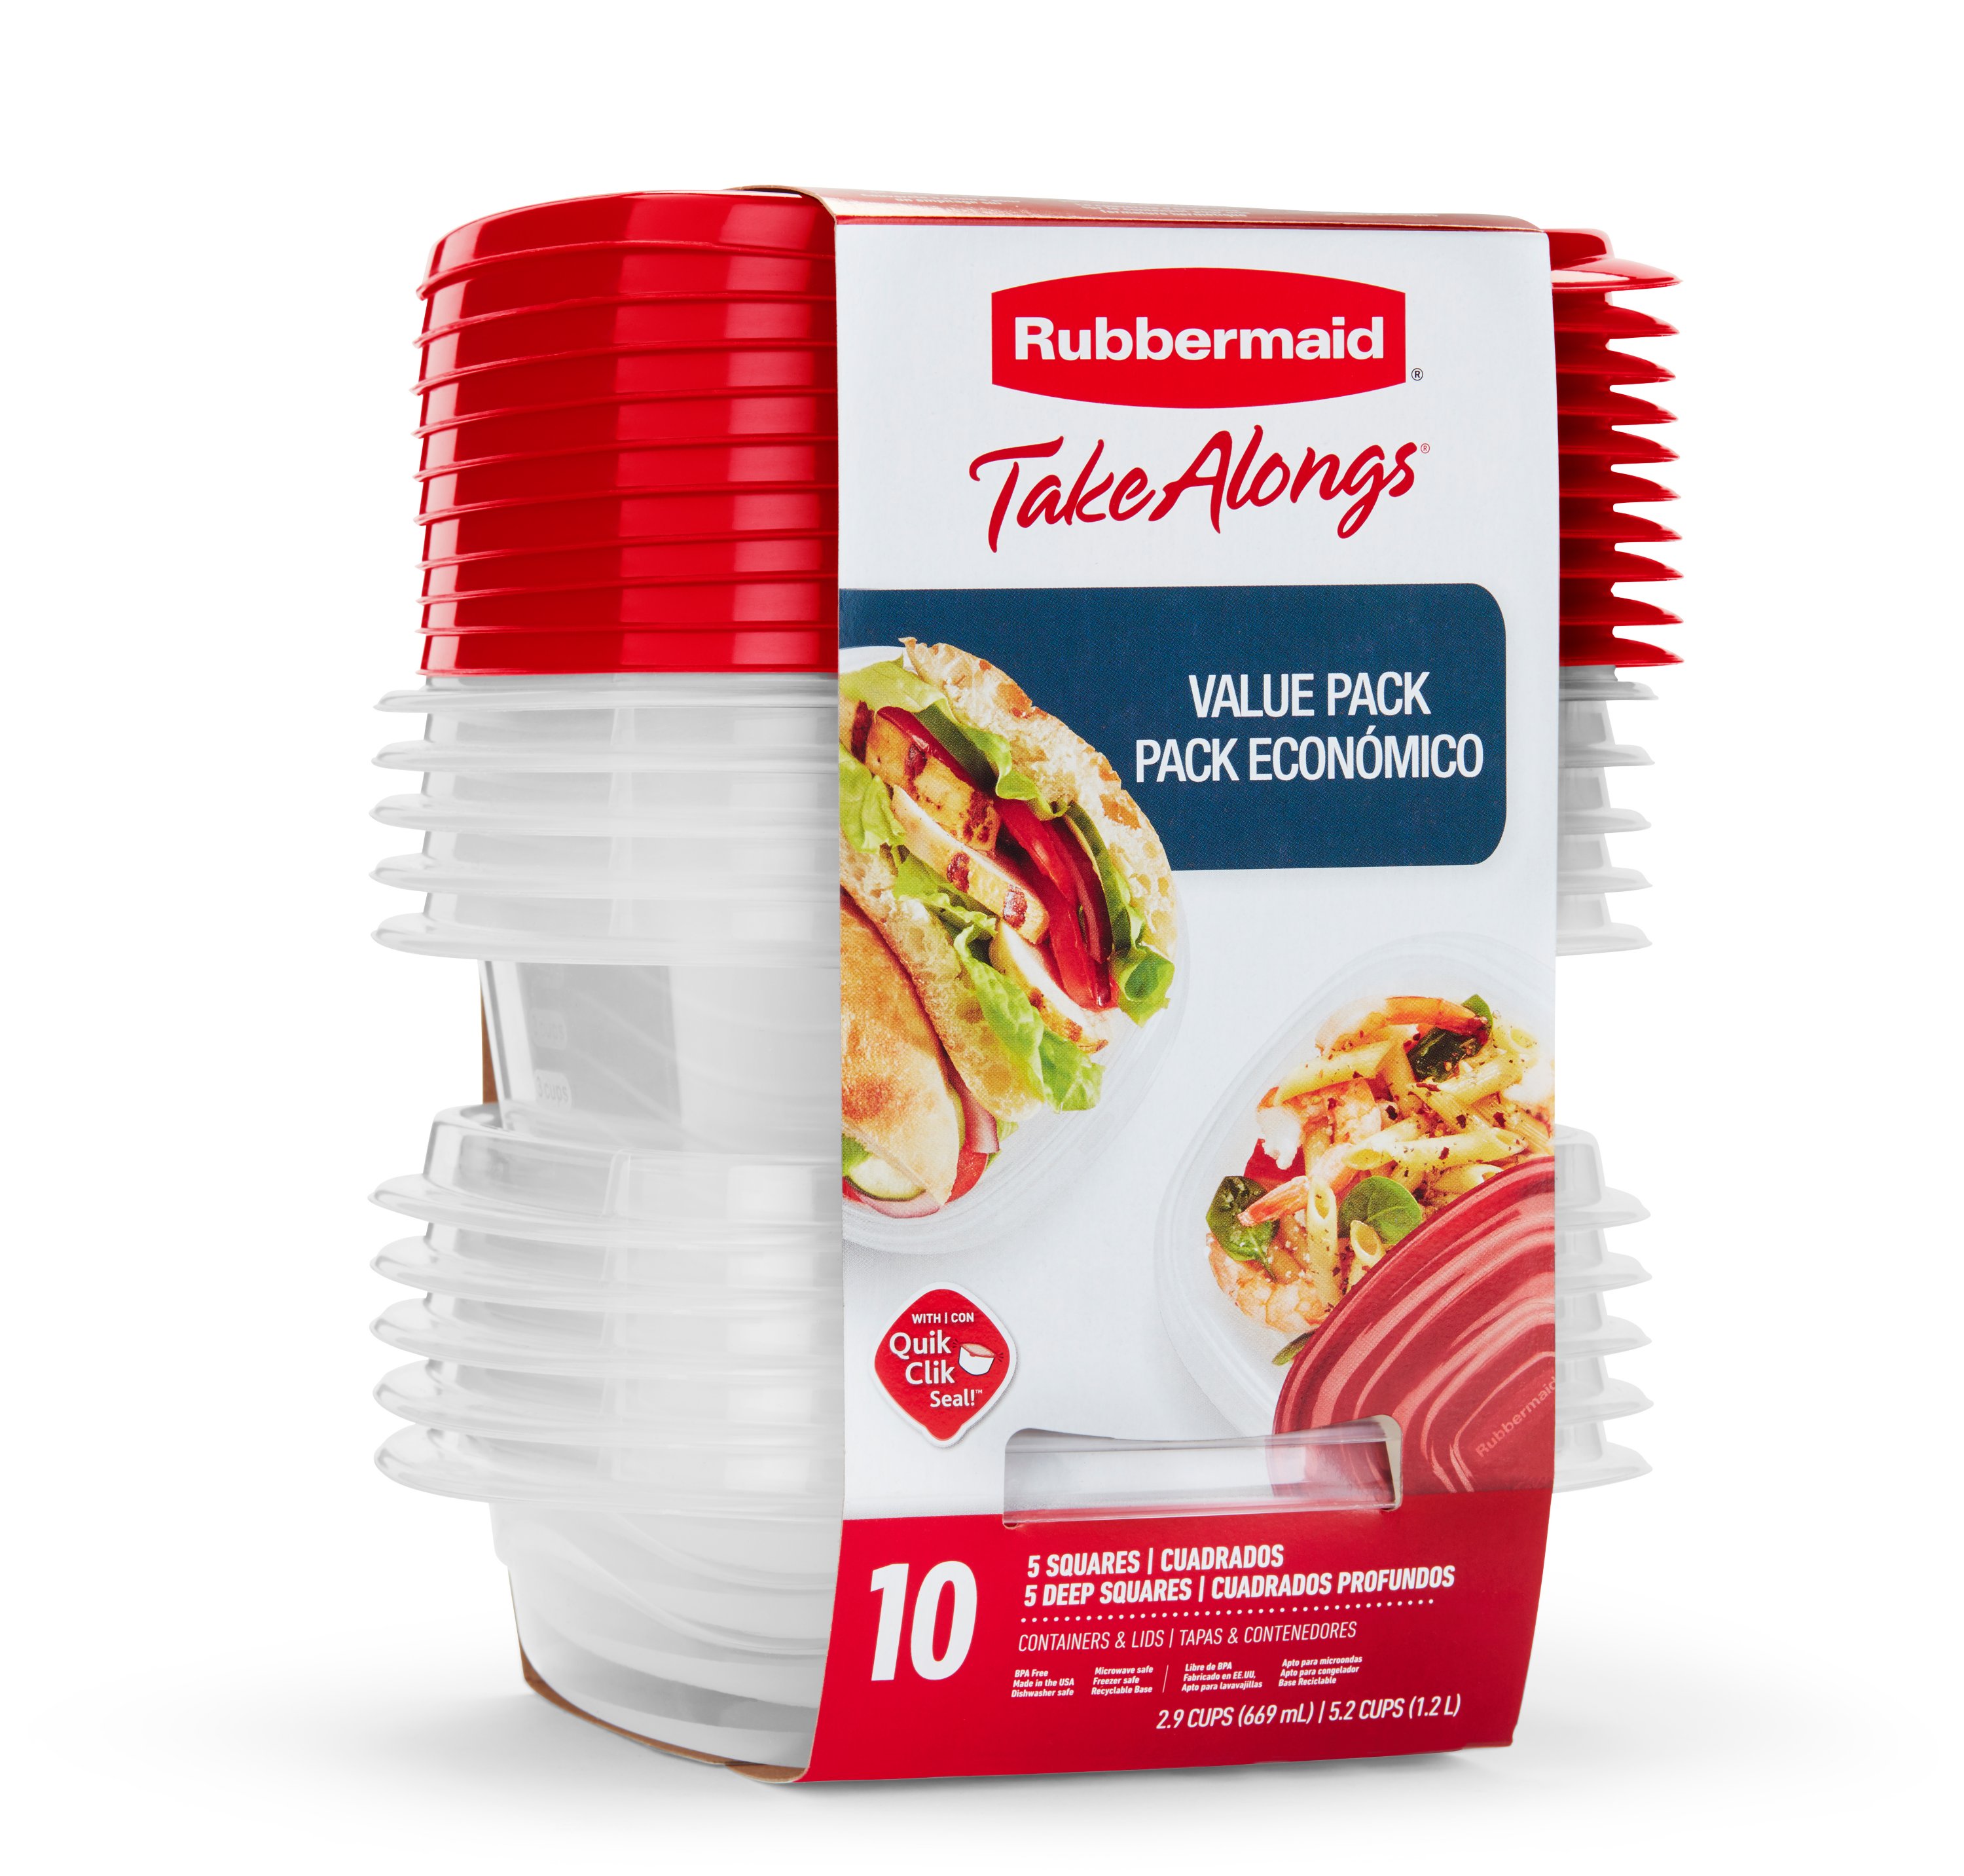 https://s7d9.scene7.com/is/image/NewellRubbermaid/2086744-rubbermaid-food-storage-takealongs-VP-VAR-TKA-SQR-20PC-RUBY-in-pack-right-angle